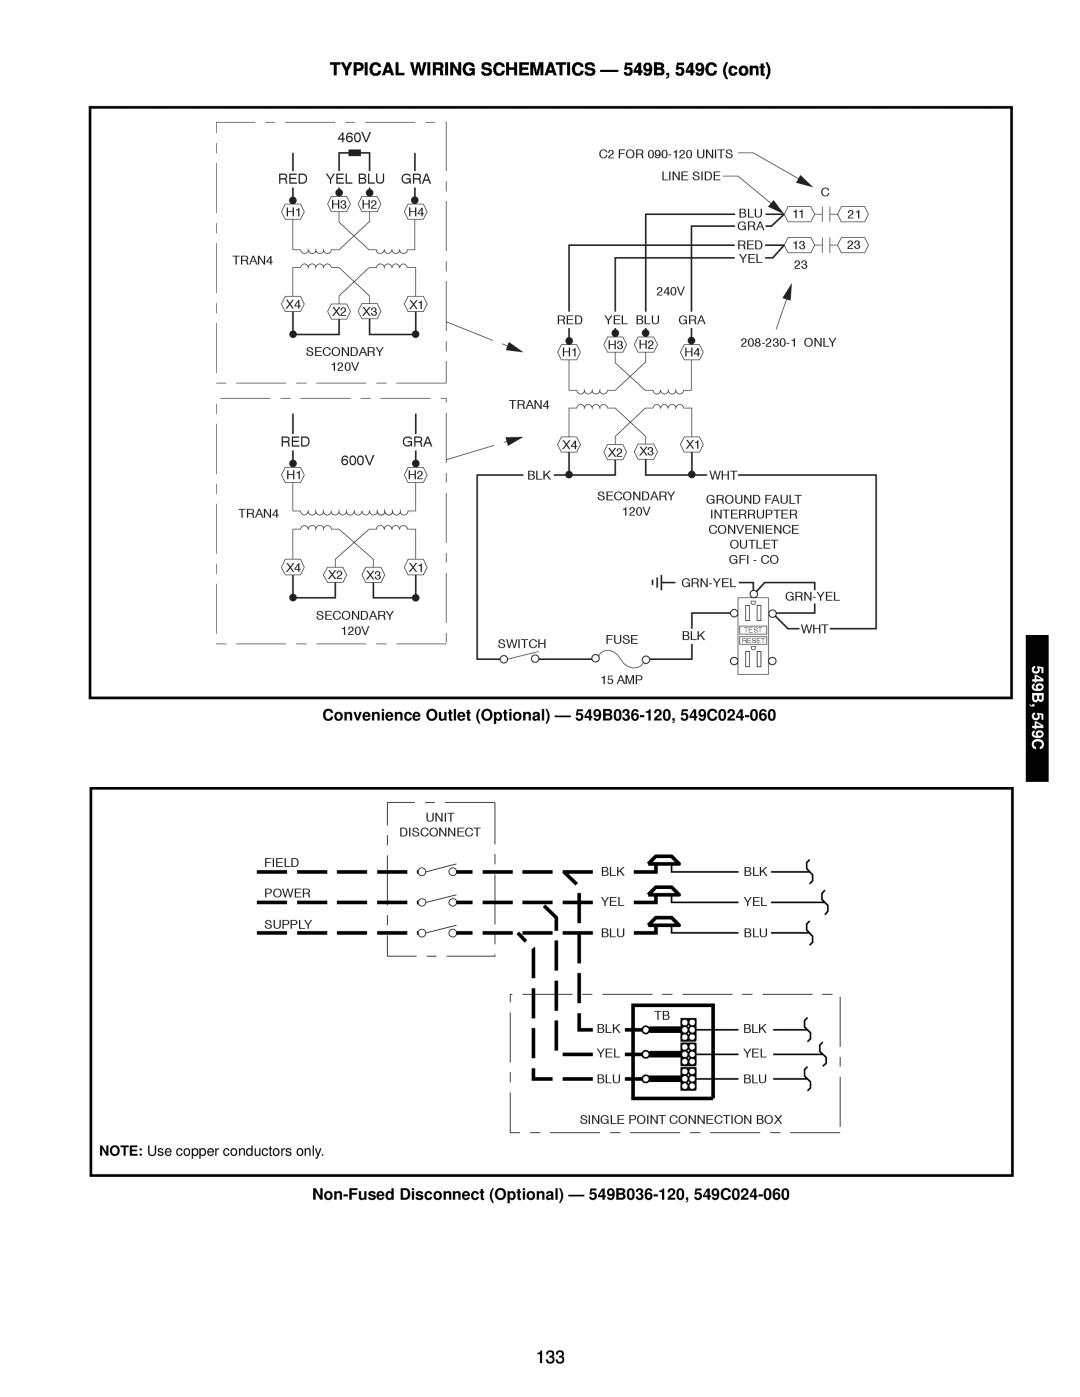 Bryant manual TYPICAL WIRING SCHEMATICS - 549B, 549C cont, a48-8189, a48-7463 